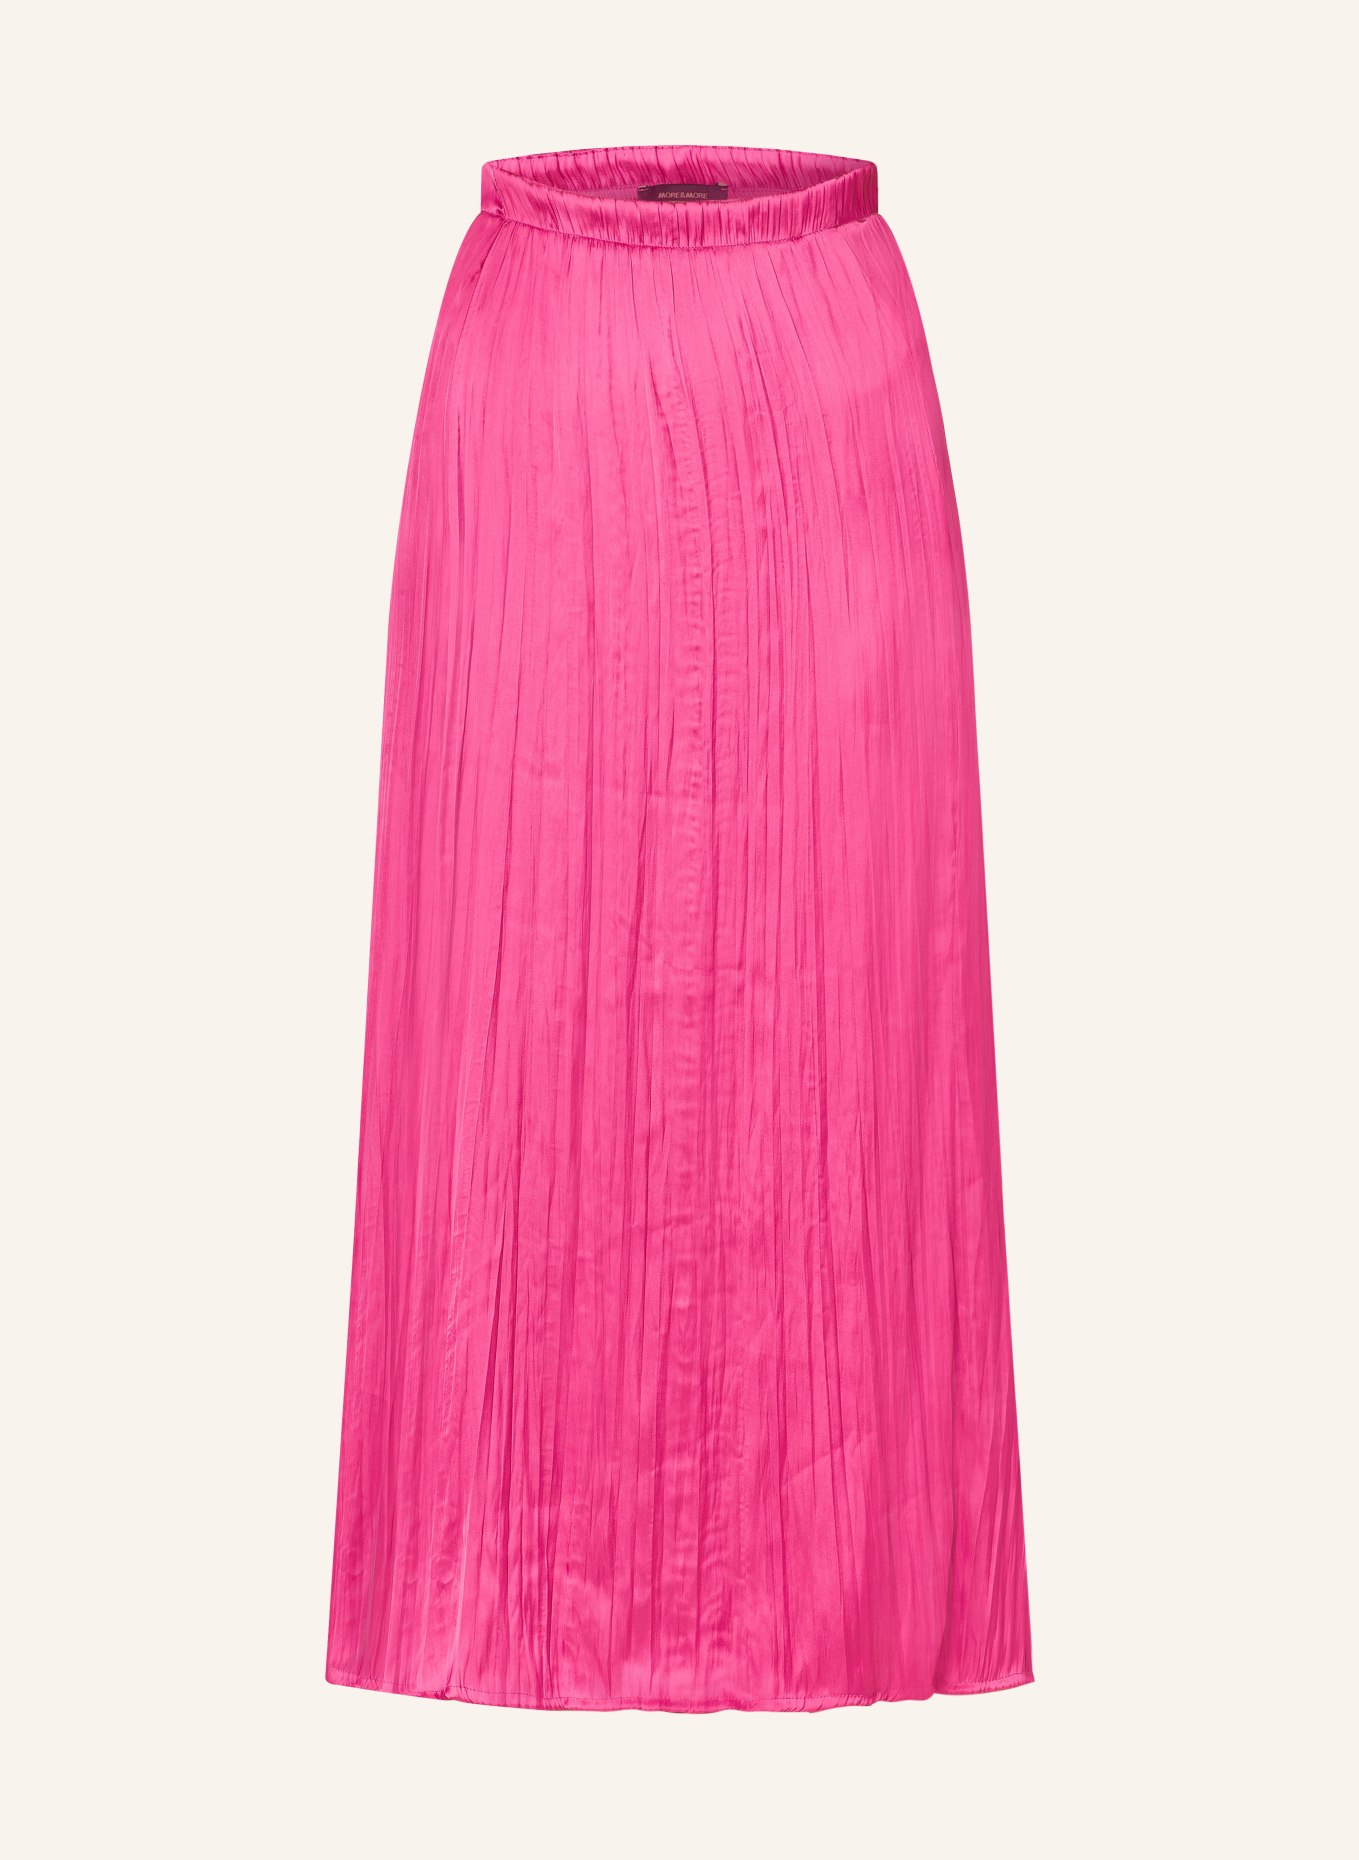 MORE & MORE Satin skirt, Color: PINK (Image 1)